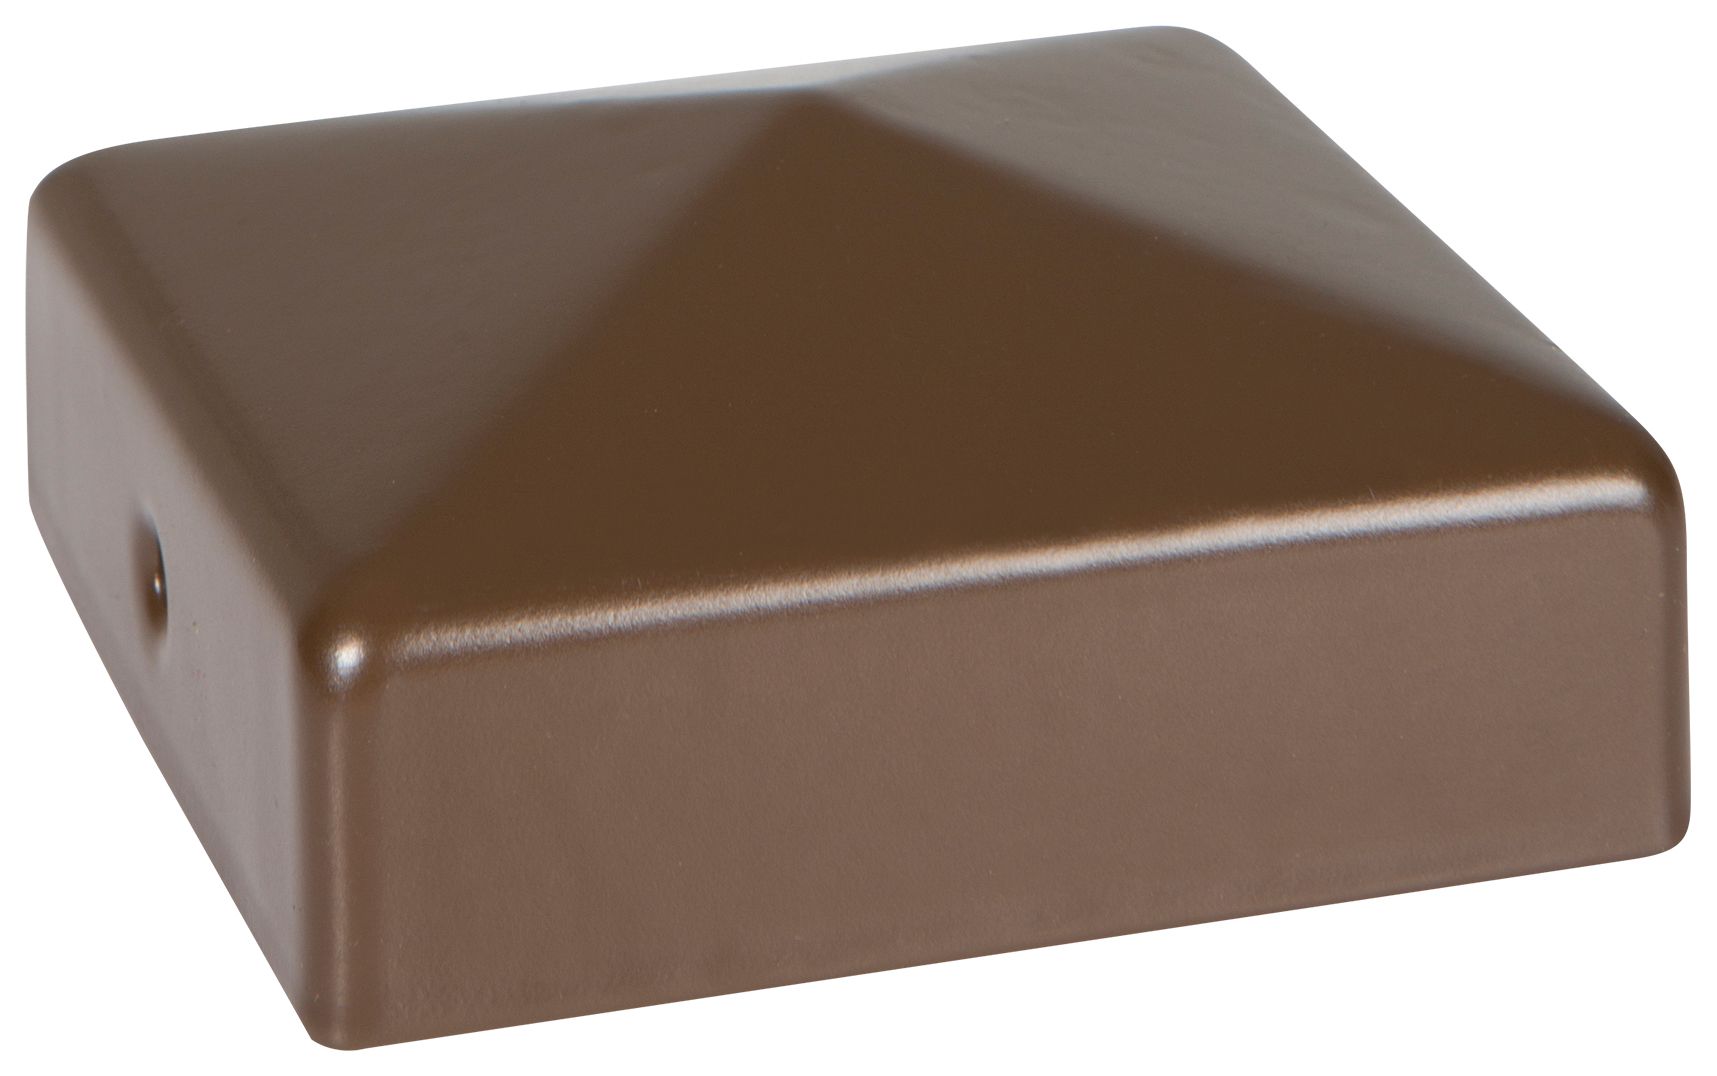 DuraPost Sepia Brown Post Cap with Bracket - 75 x 75mm